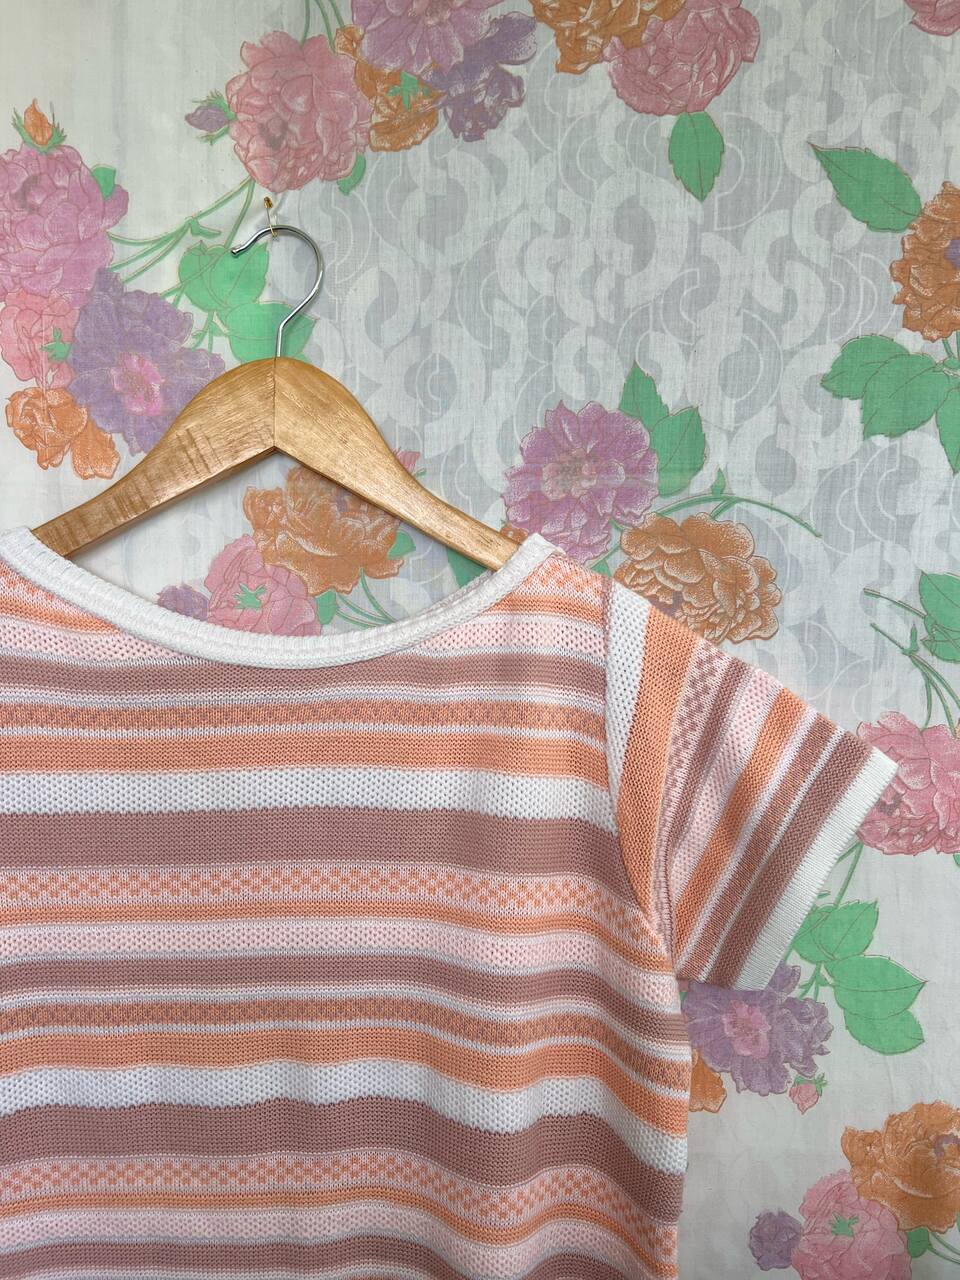 90's Striped Tricot Top